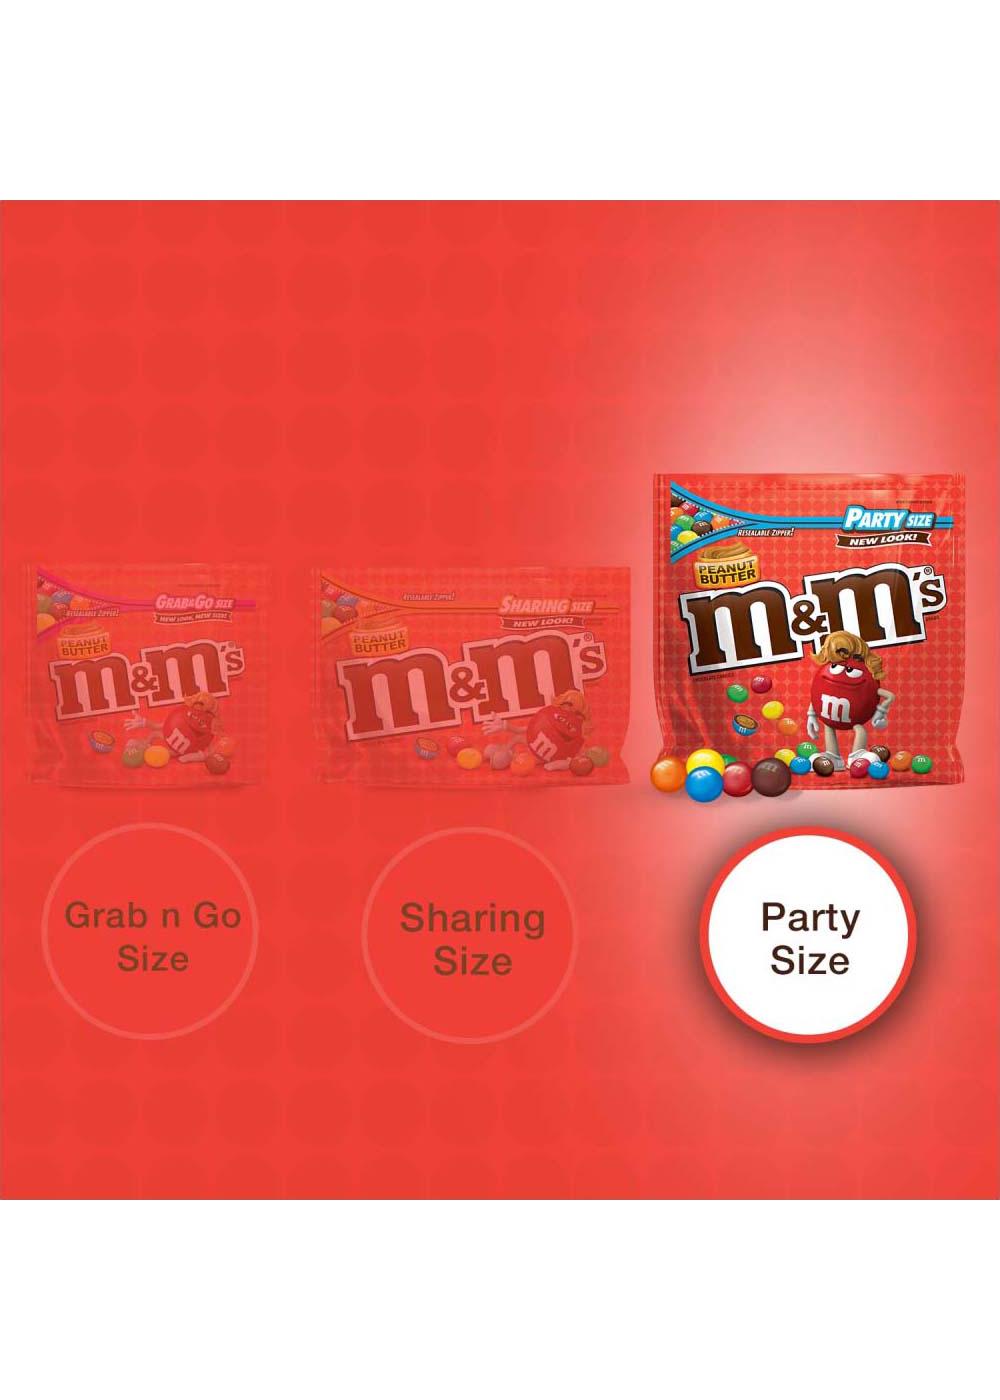 M&M'S Peanut Butter Chocolate Candy Party Size 38-Ounce Bag